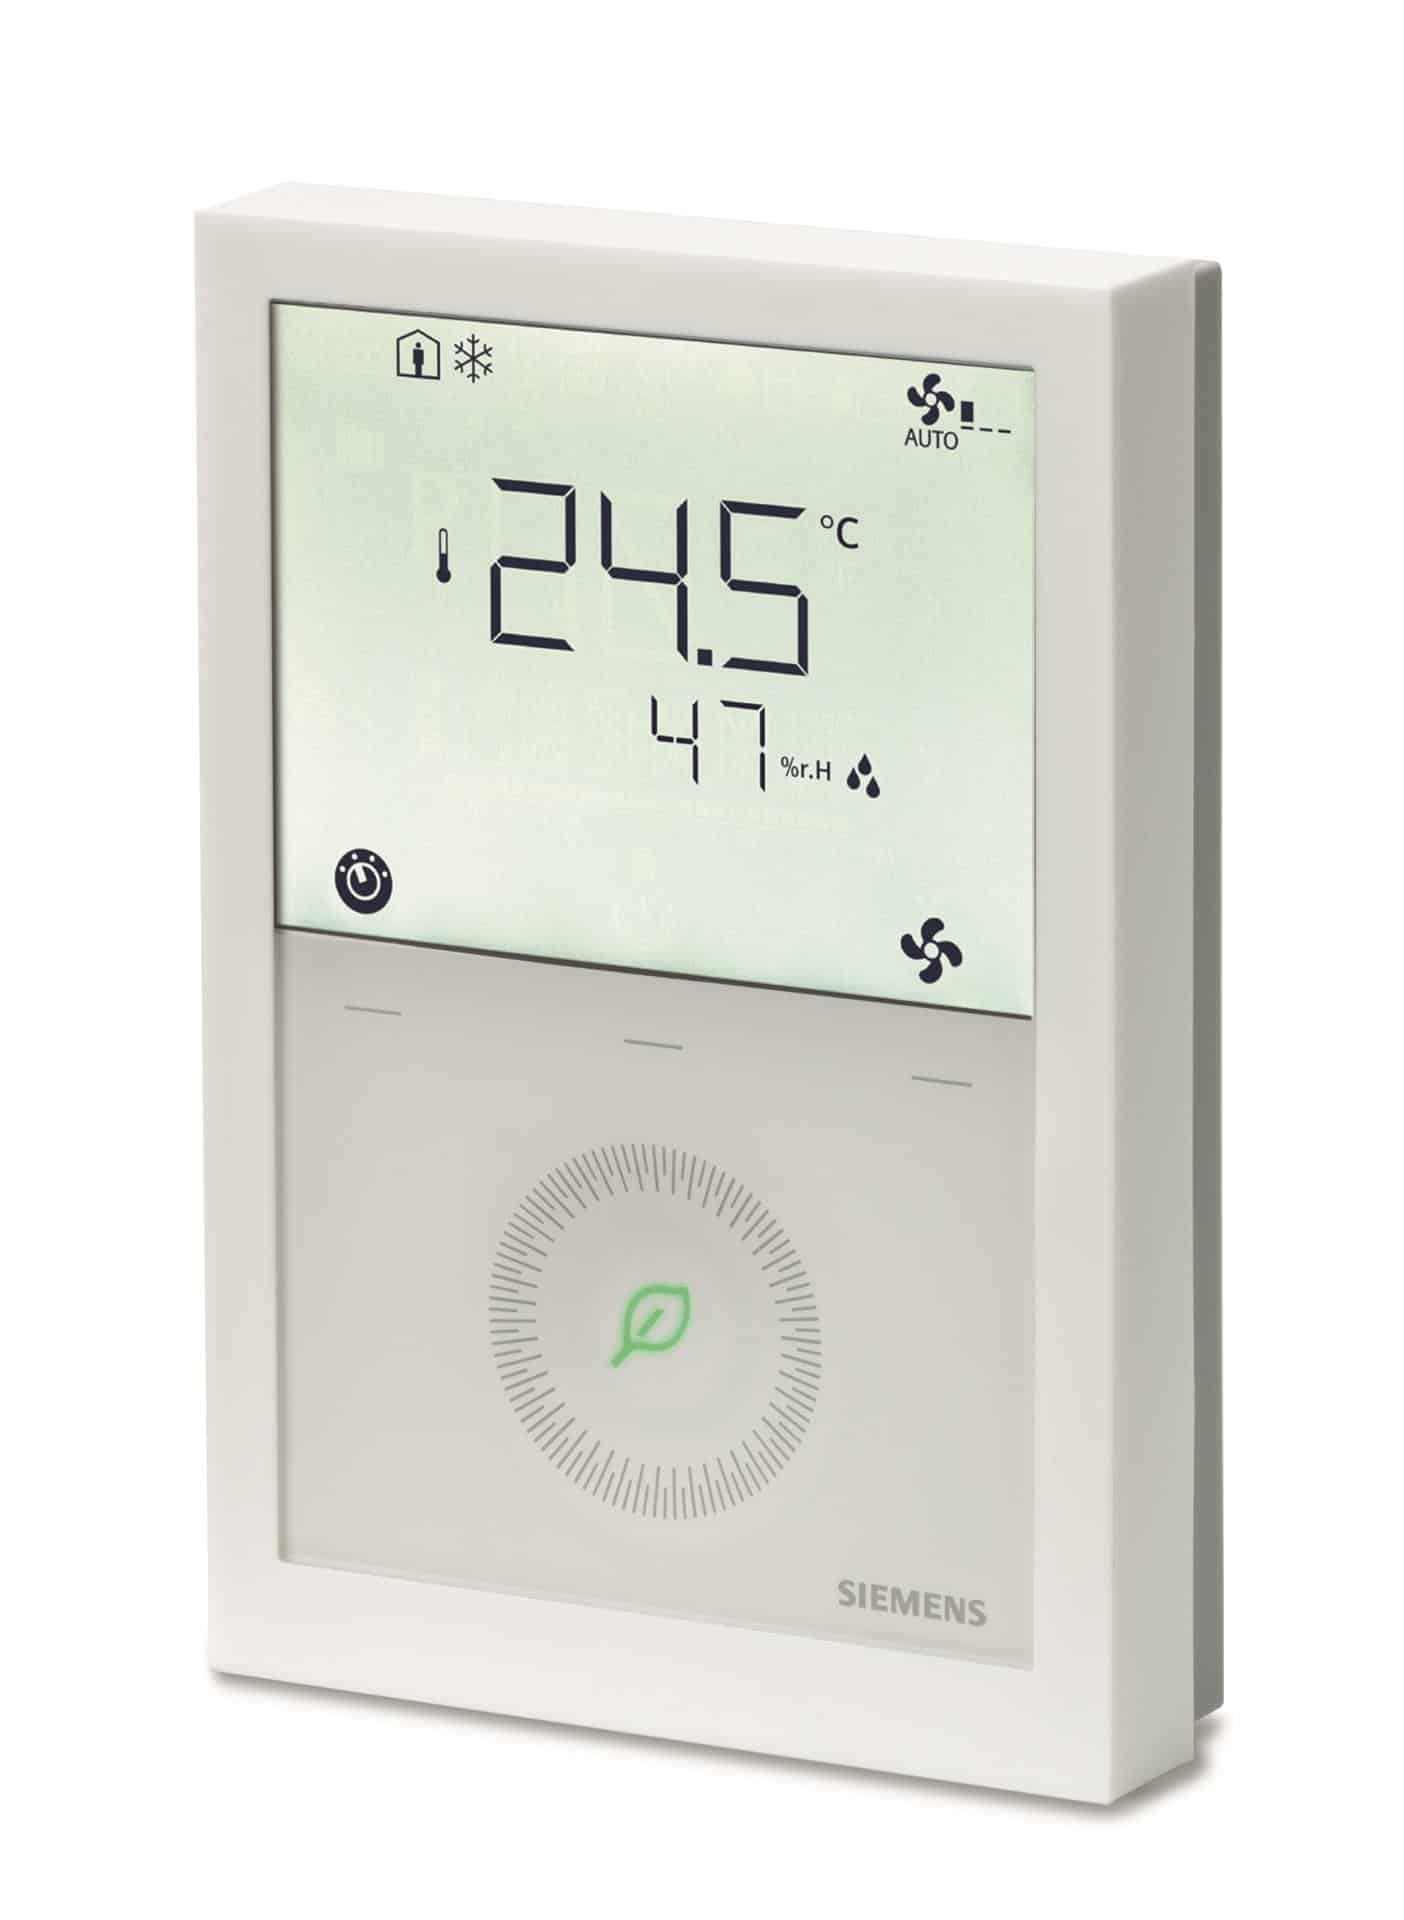 RDG260KN KNX communicating room thermostat. Outputs modulating (DC) or on/off. Fan coil (3-speed / DC fan)